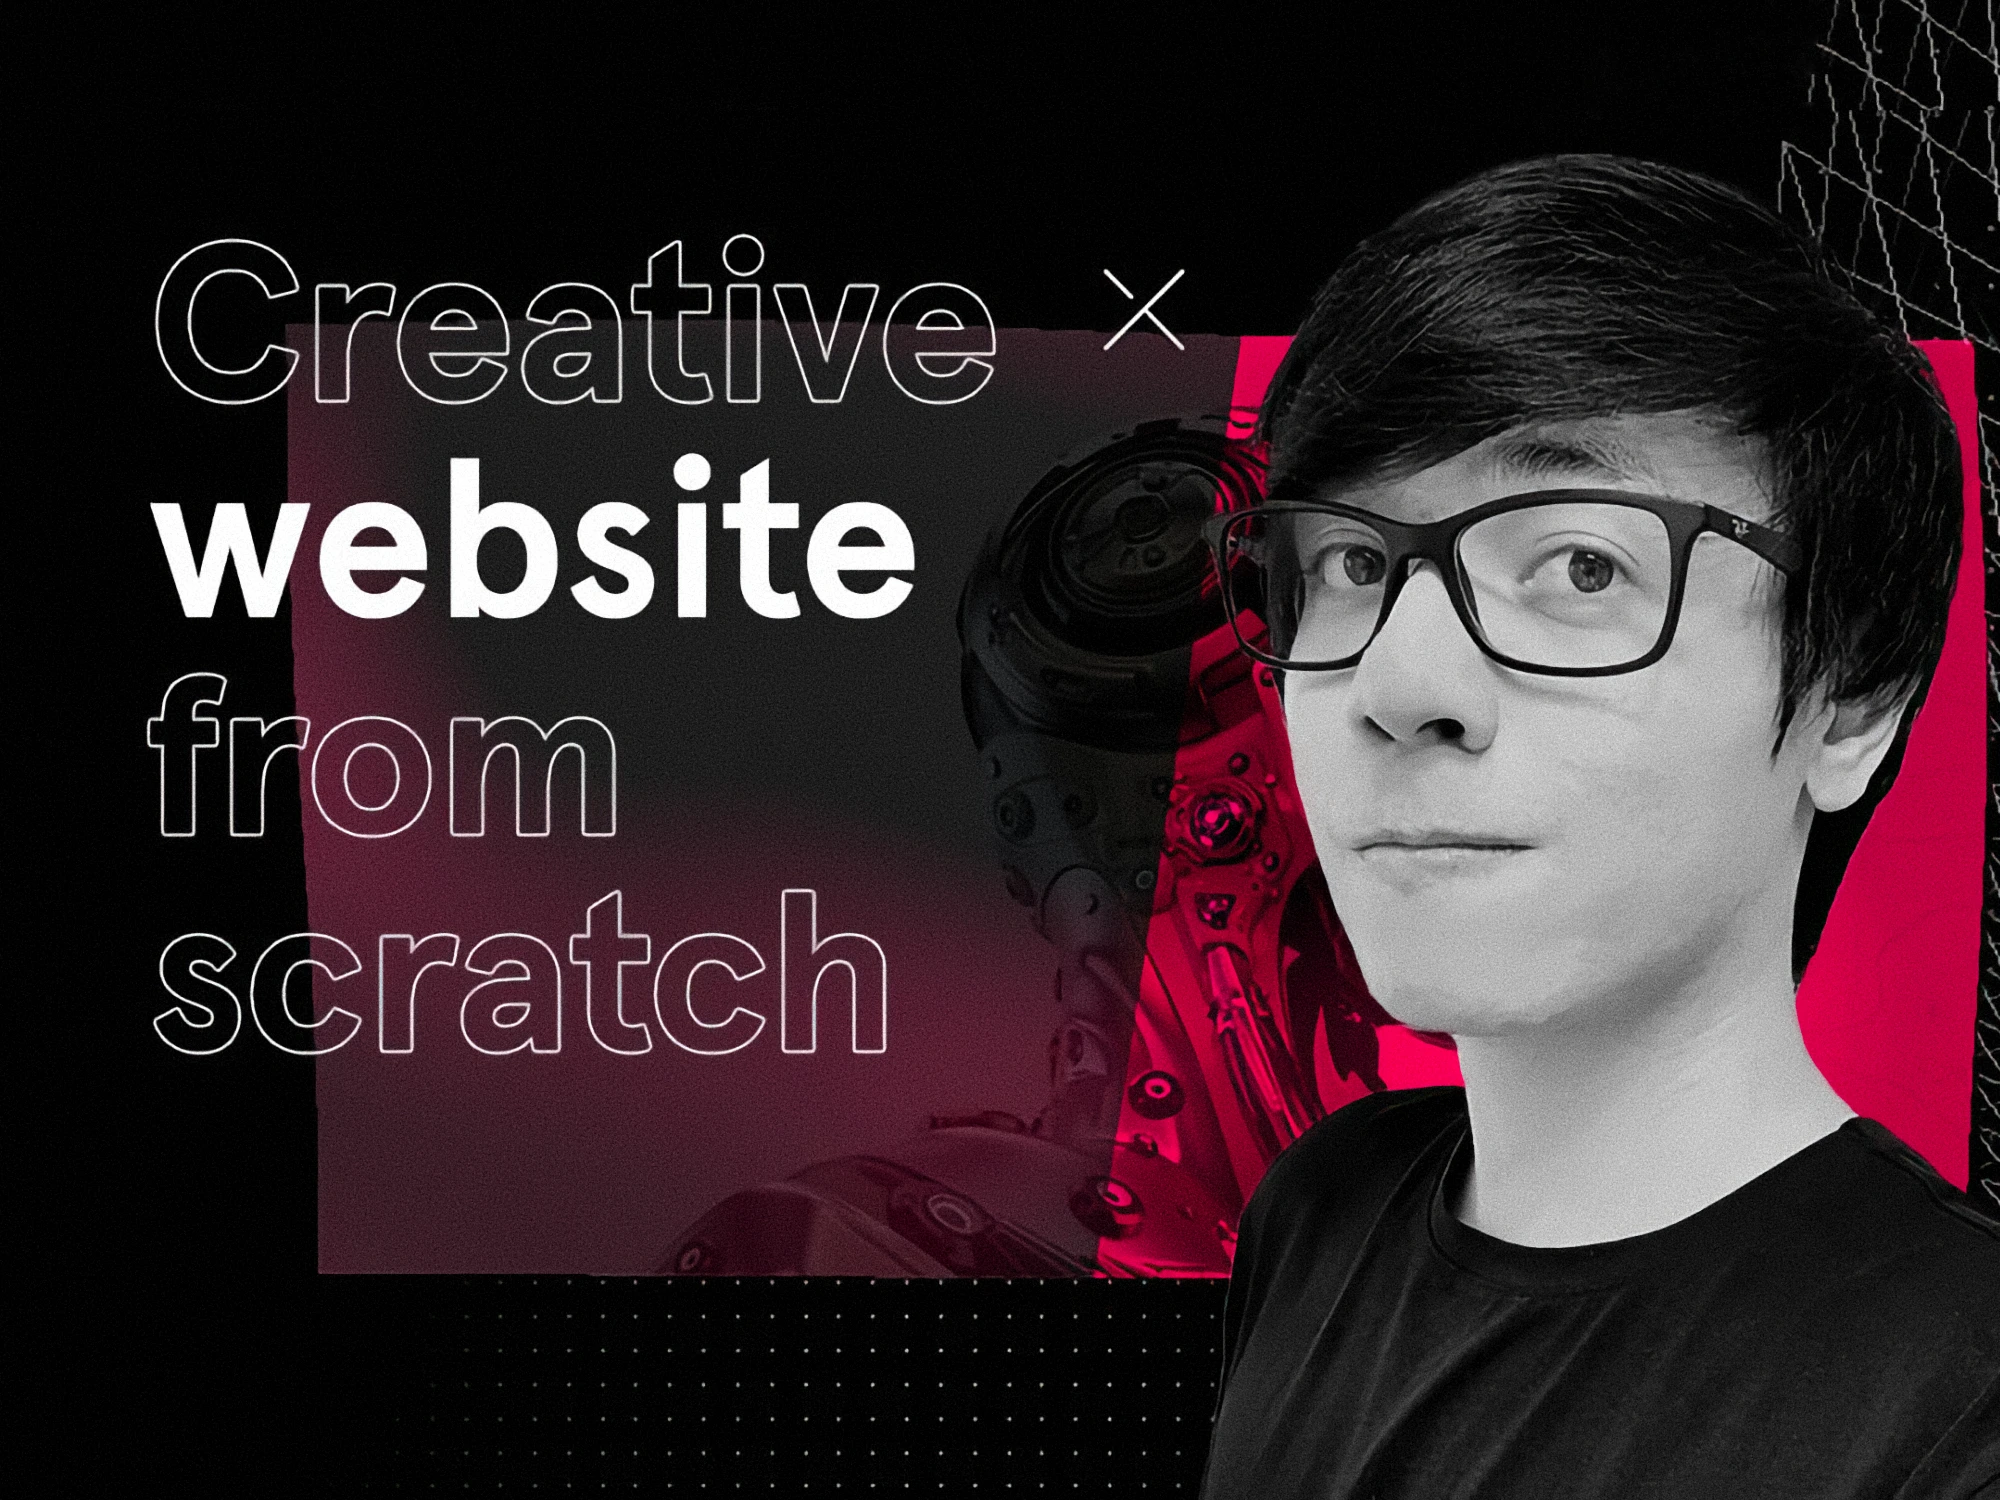 [VIP] Awwwards: Building an immersive creative website from scratch without frameworks